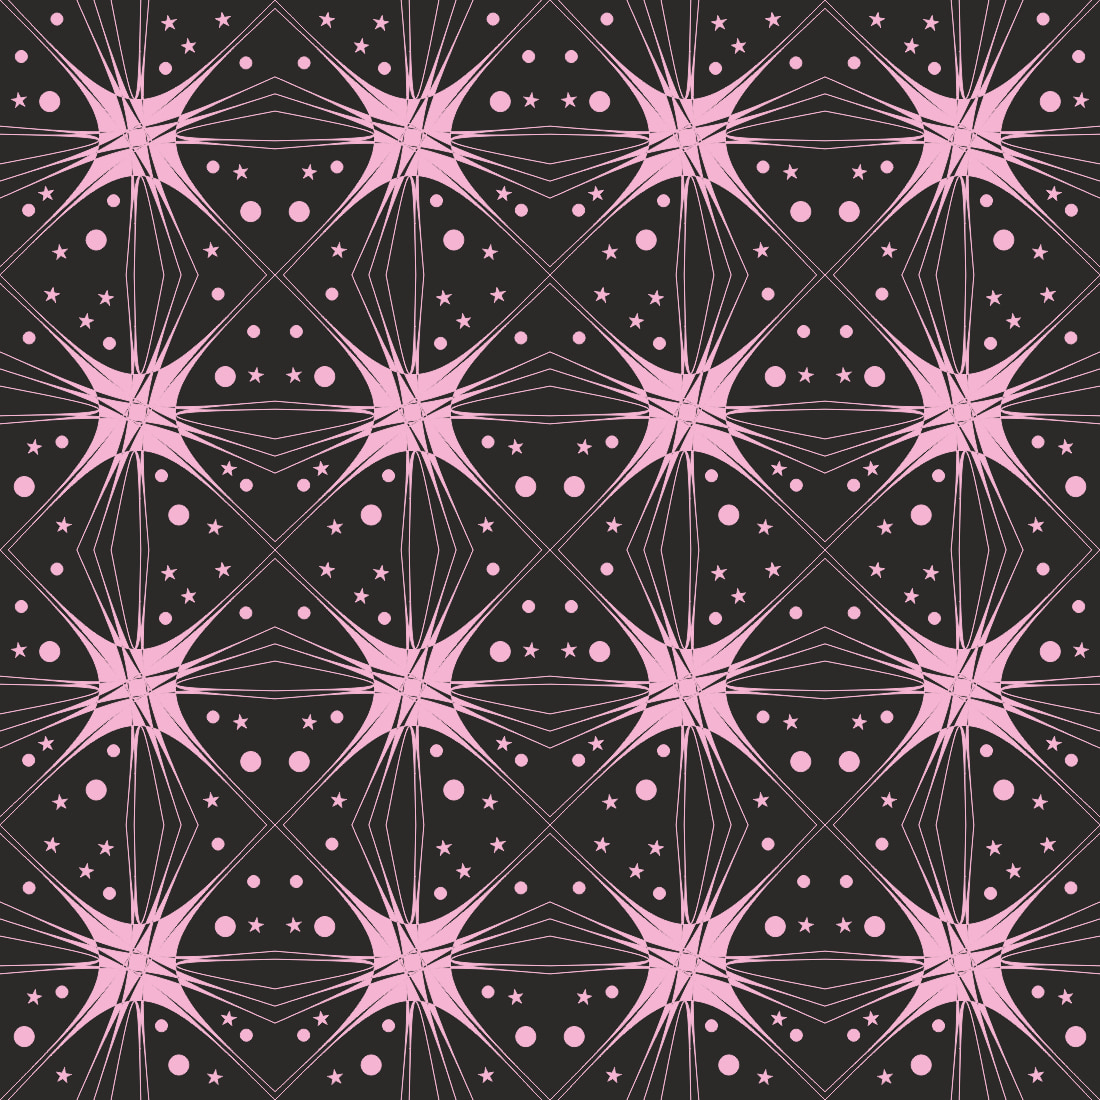 Digital Pattern preview image.